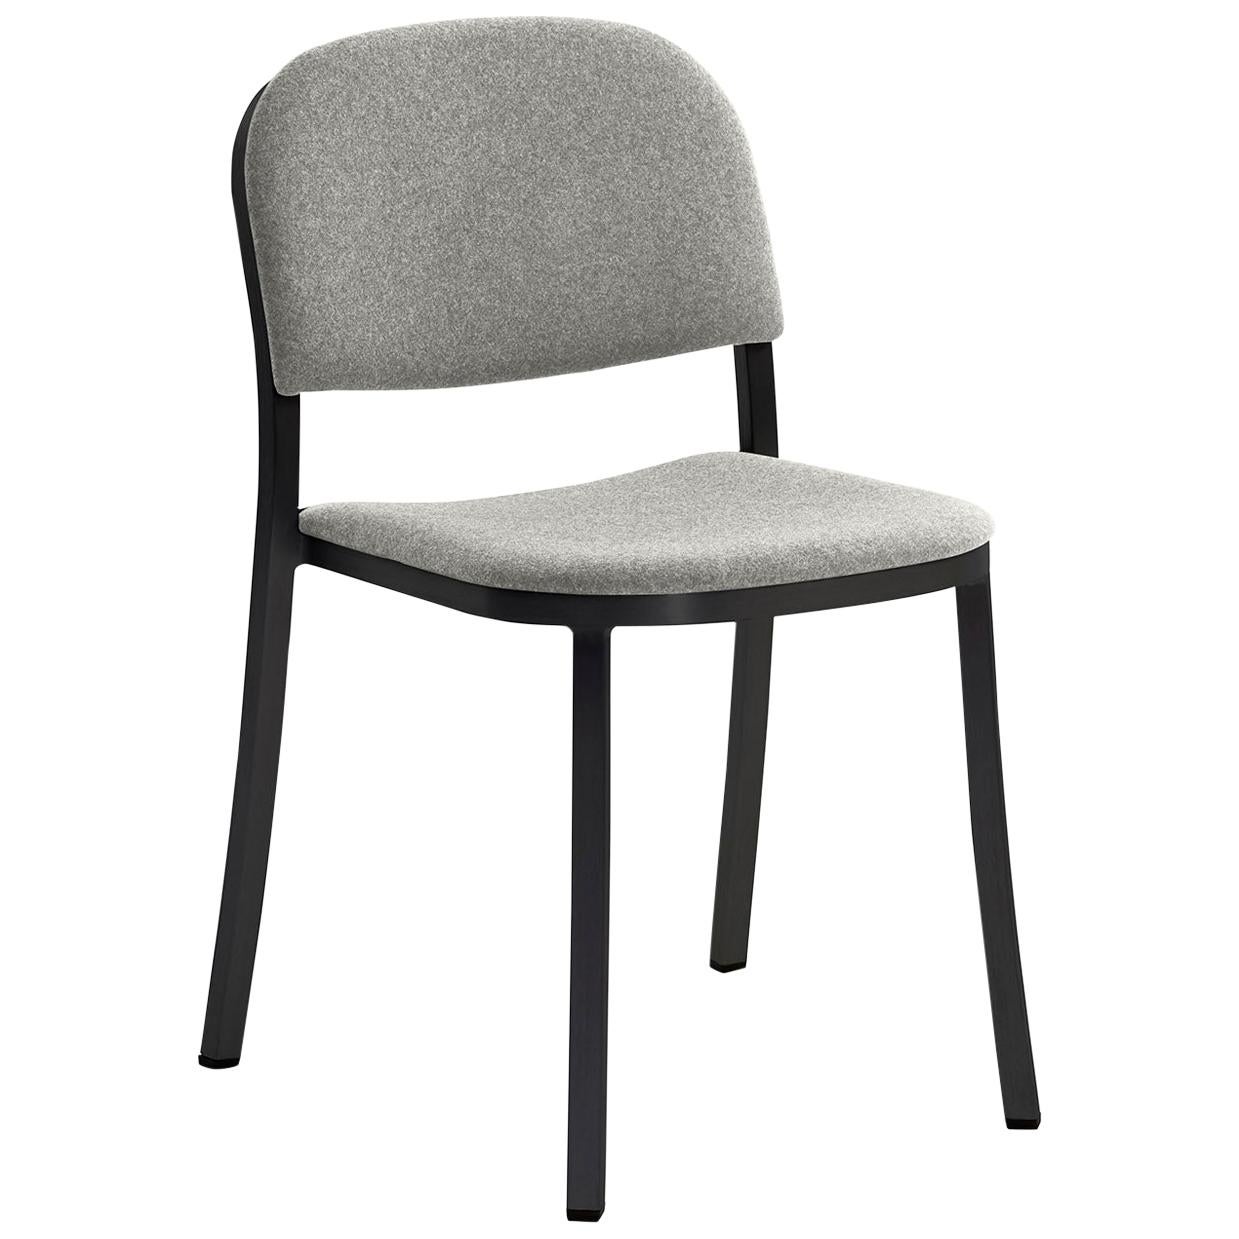 Emeco 1 Inch Stacking Chair with Grey Upholstery & Black Legs by Jasper Morrison For Sale